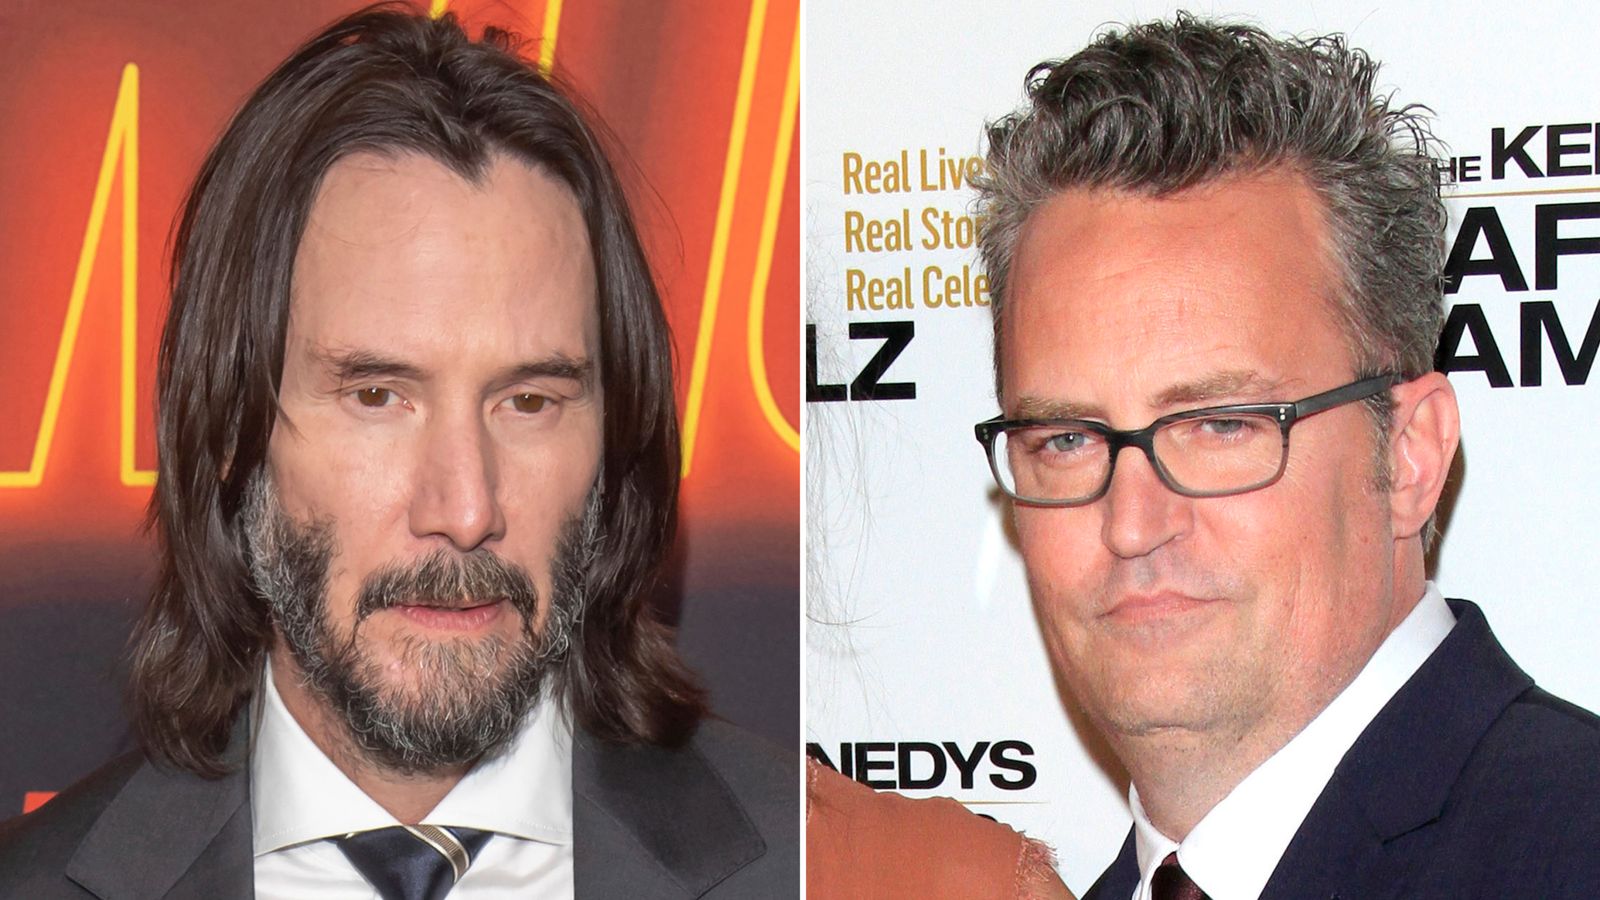 Matthew Perry says he will remove Keanu Reeves insult from future editions of his book